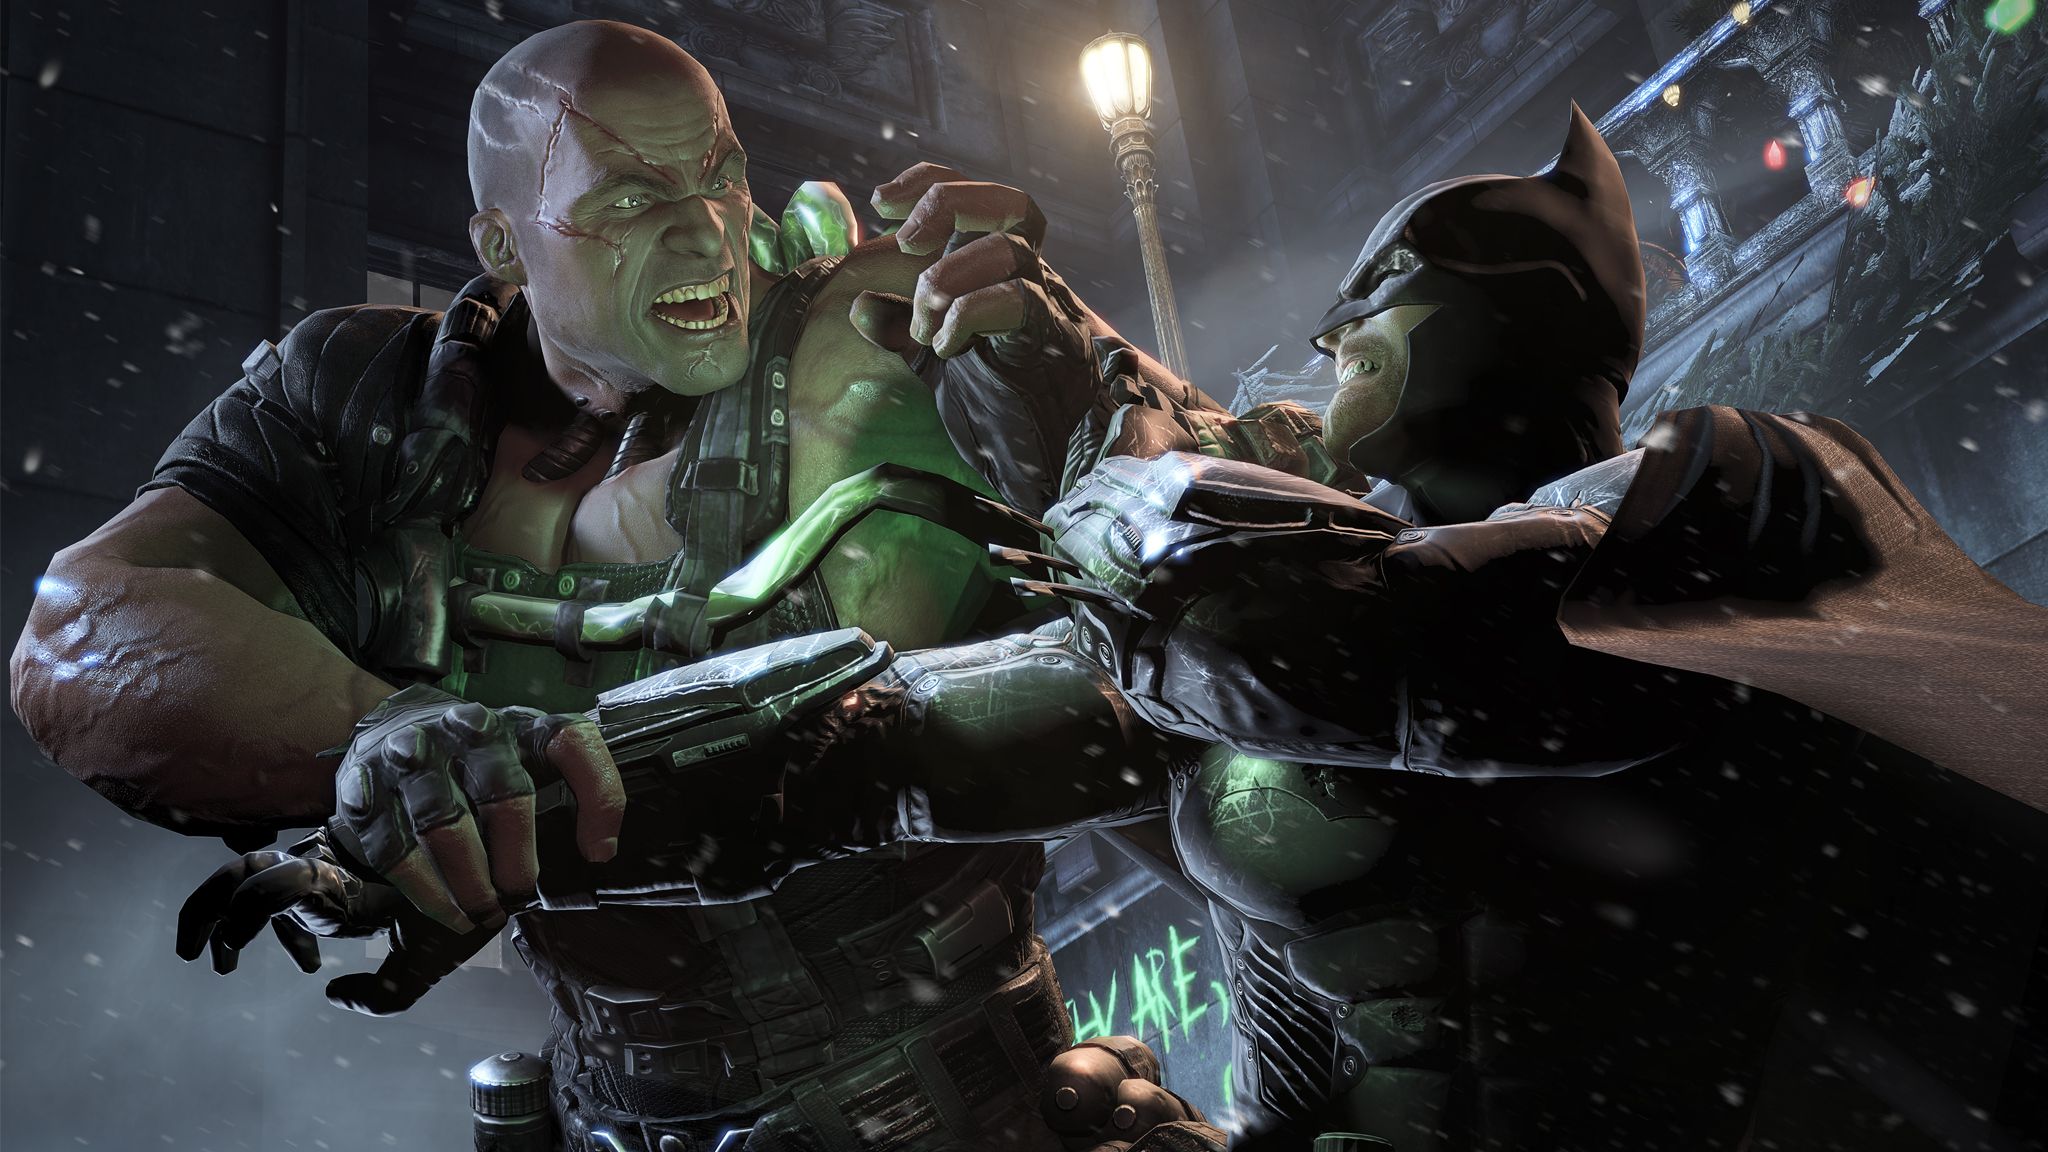 A disappointing update on the future of 'Batman: Arkham Origins'